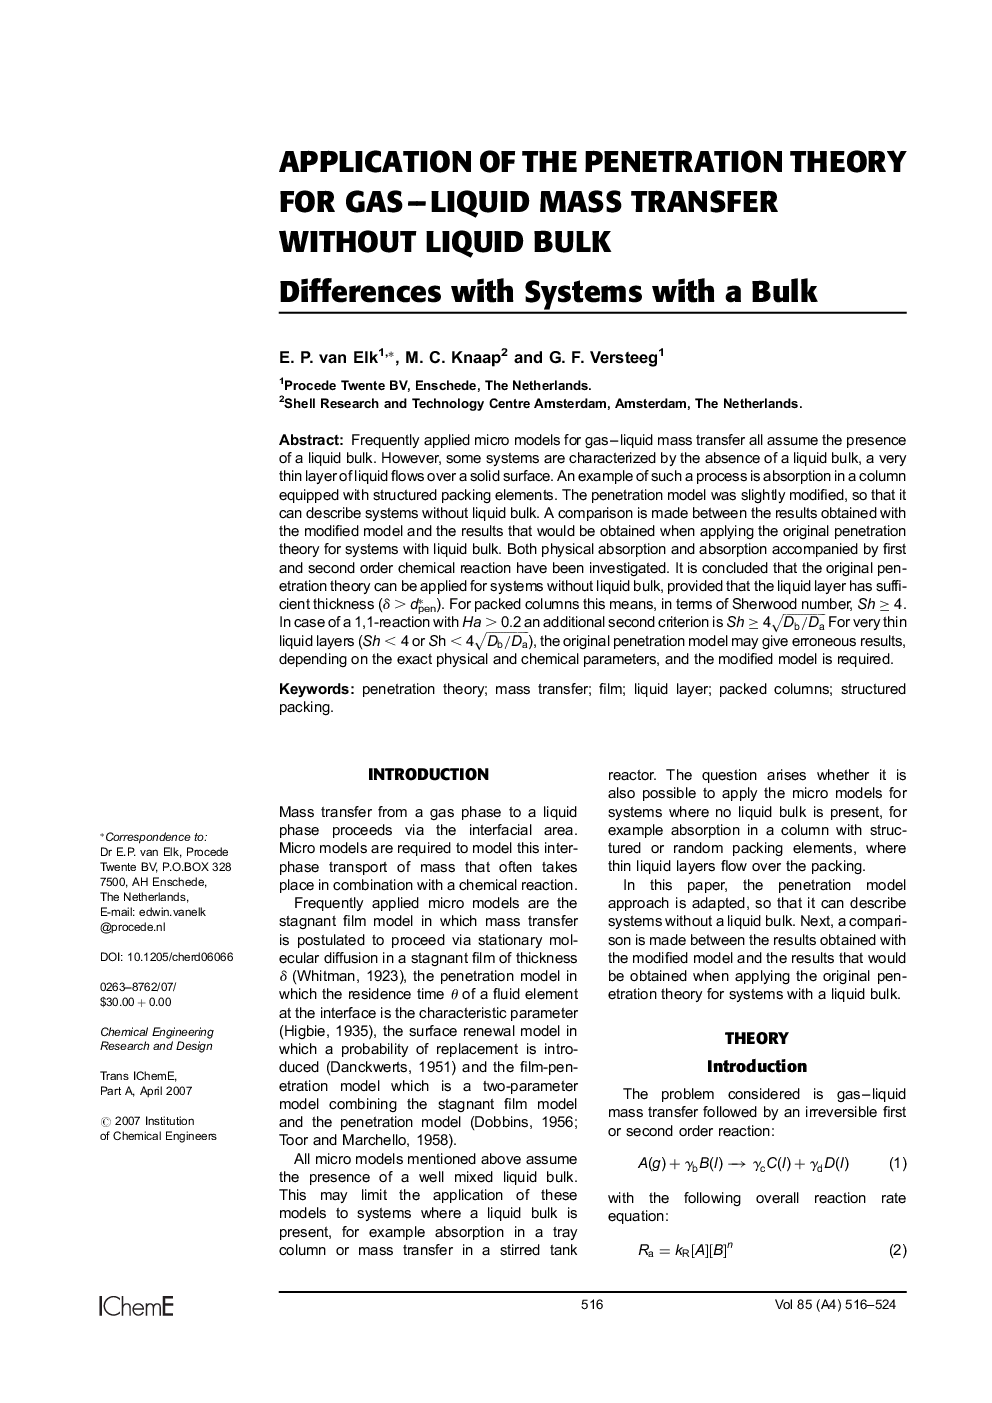 Application of the Penetration Theory for Gas–Liquid Mass Transfer Without Liquid Bulk: Differences with Systems with a Bulk